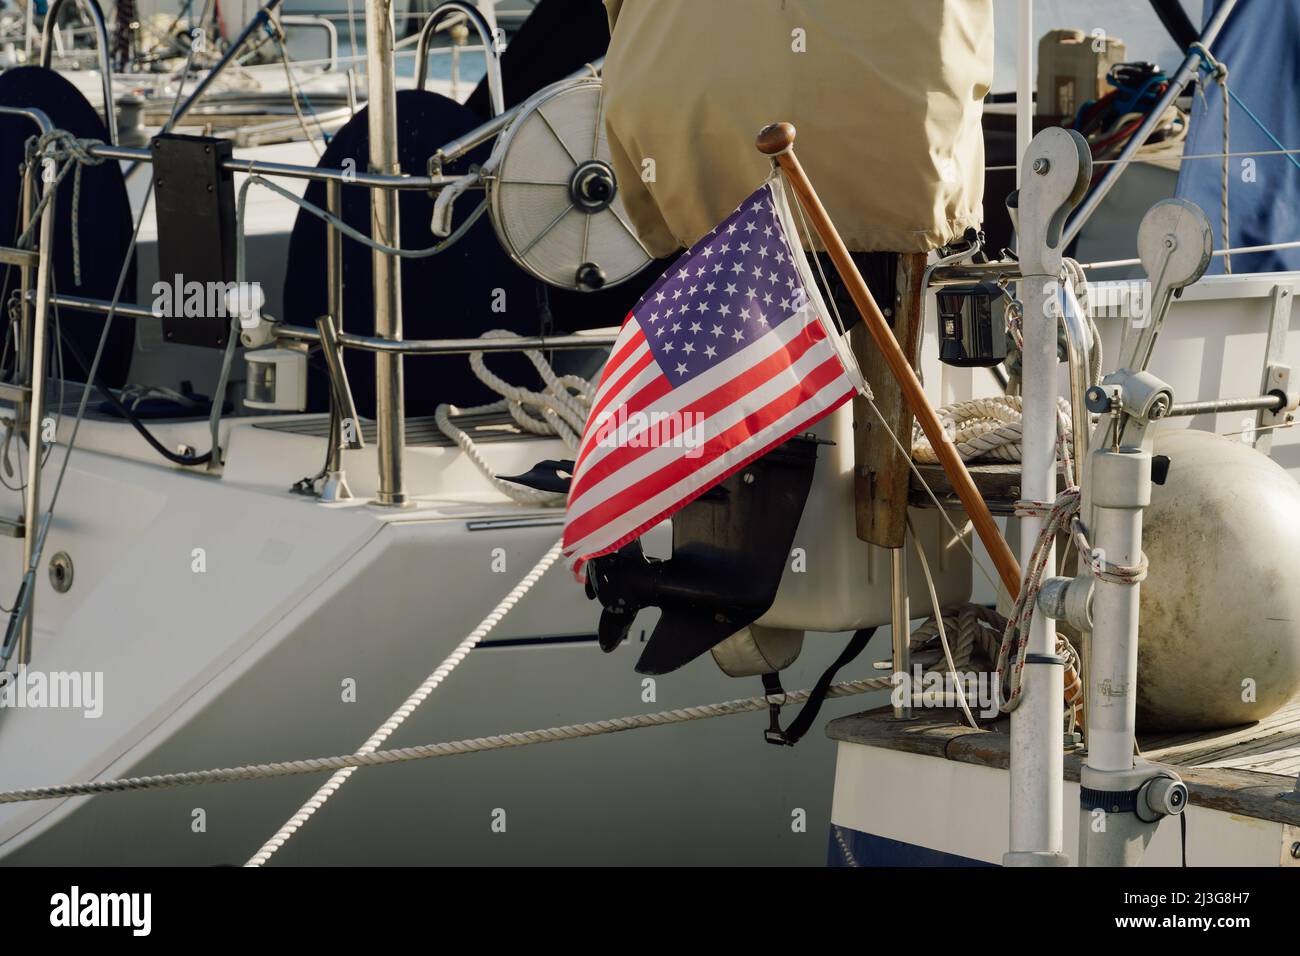 United States American national flag with stars and stripes on a wooden mast waving against the wind on the back of a moored boat at a marina. Stock Photo